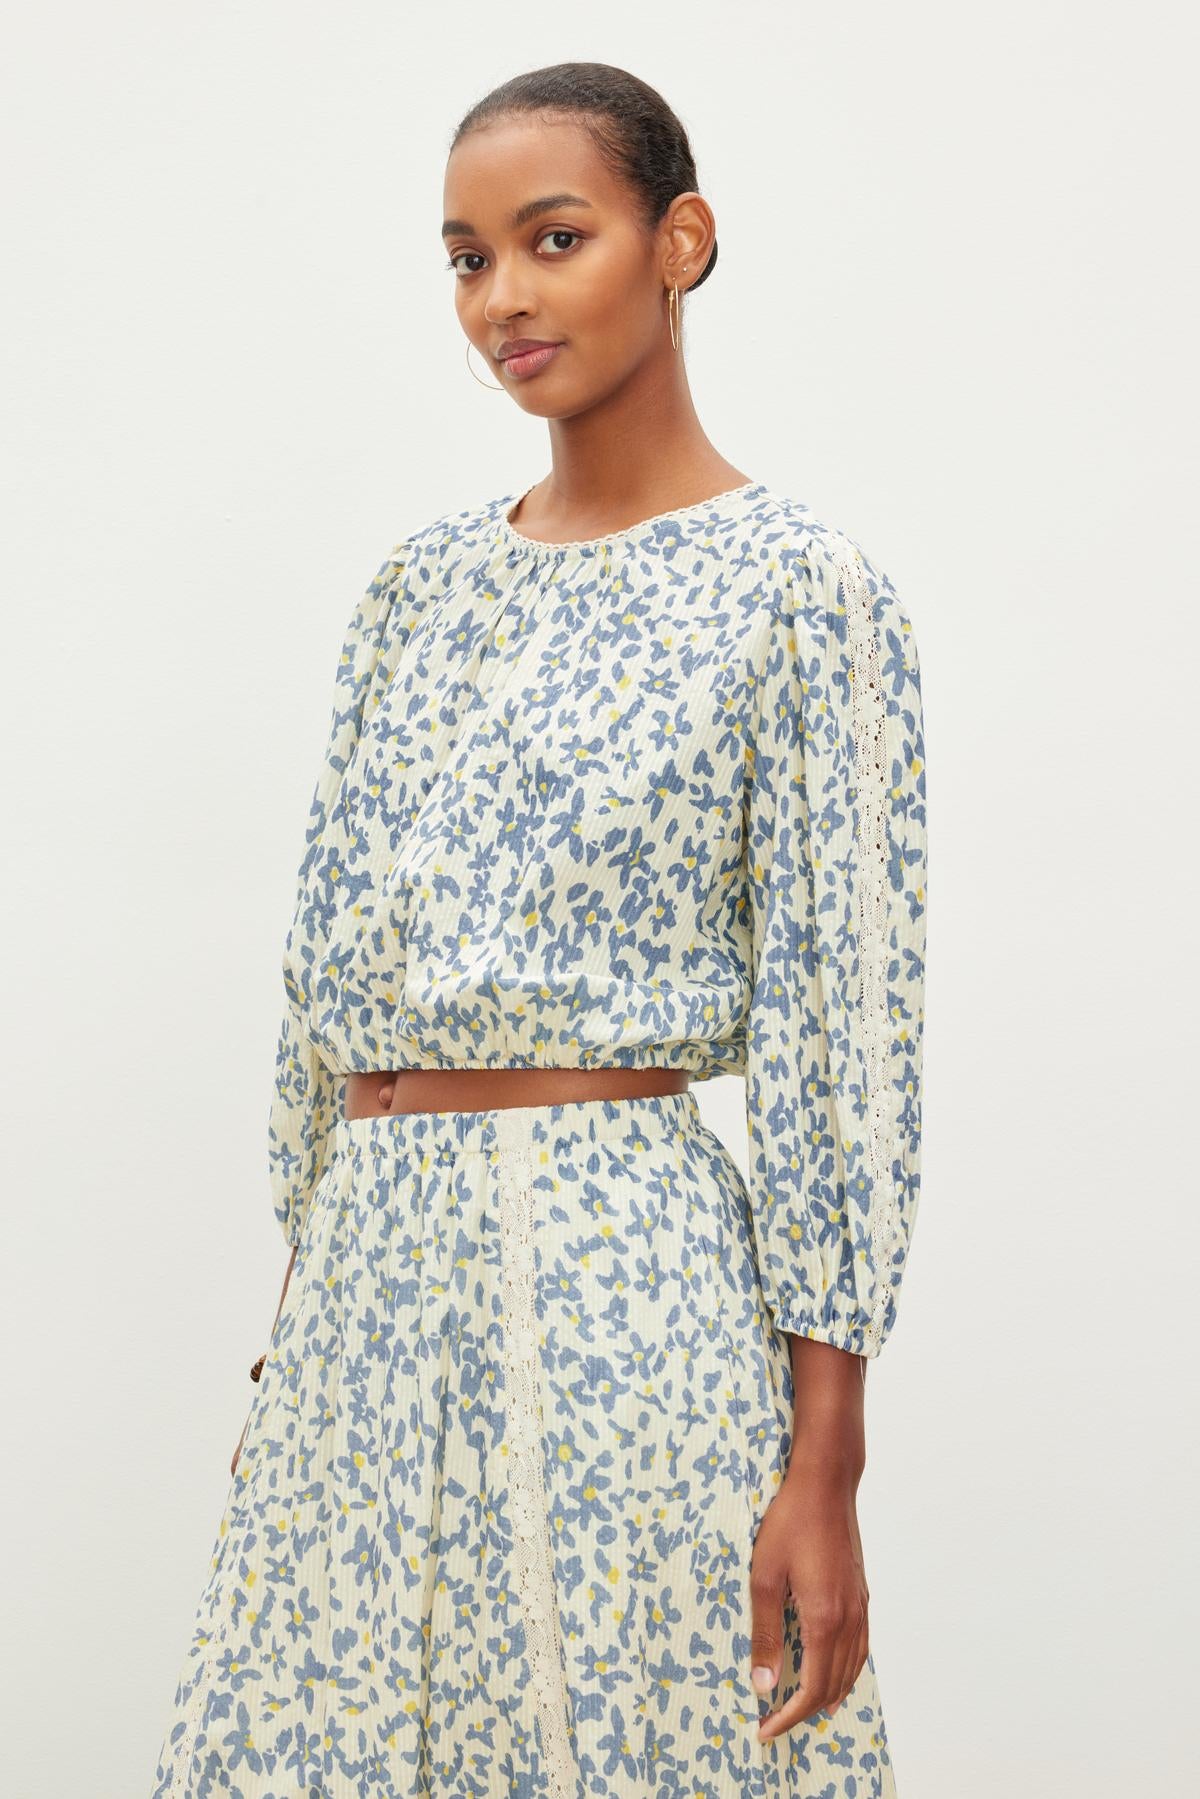   A person wearing a matching long-sleeved CAMERON TOP and skirt with a blue and yellow leaf pattern, standing against a plain white background, by Velvet by Graham & Spencer. 